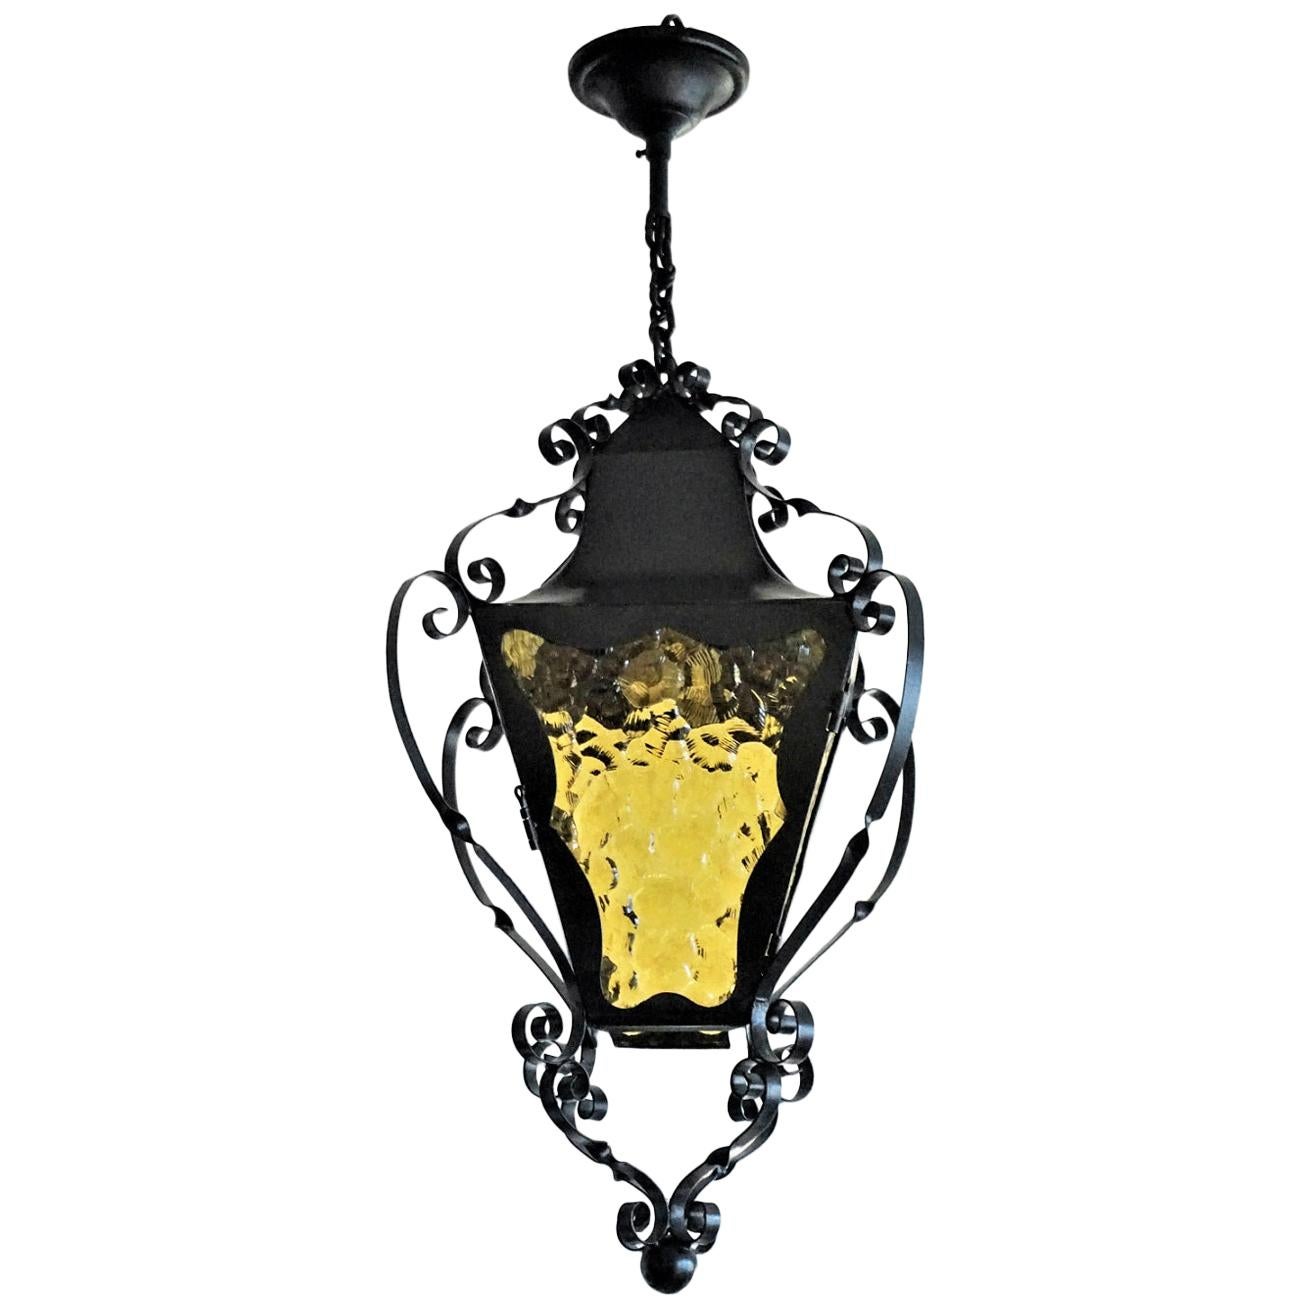 French Handcrafted Wrought Iron Glass Lantern Indoor or Outdoor